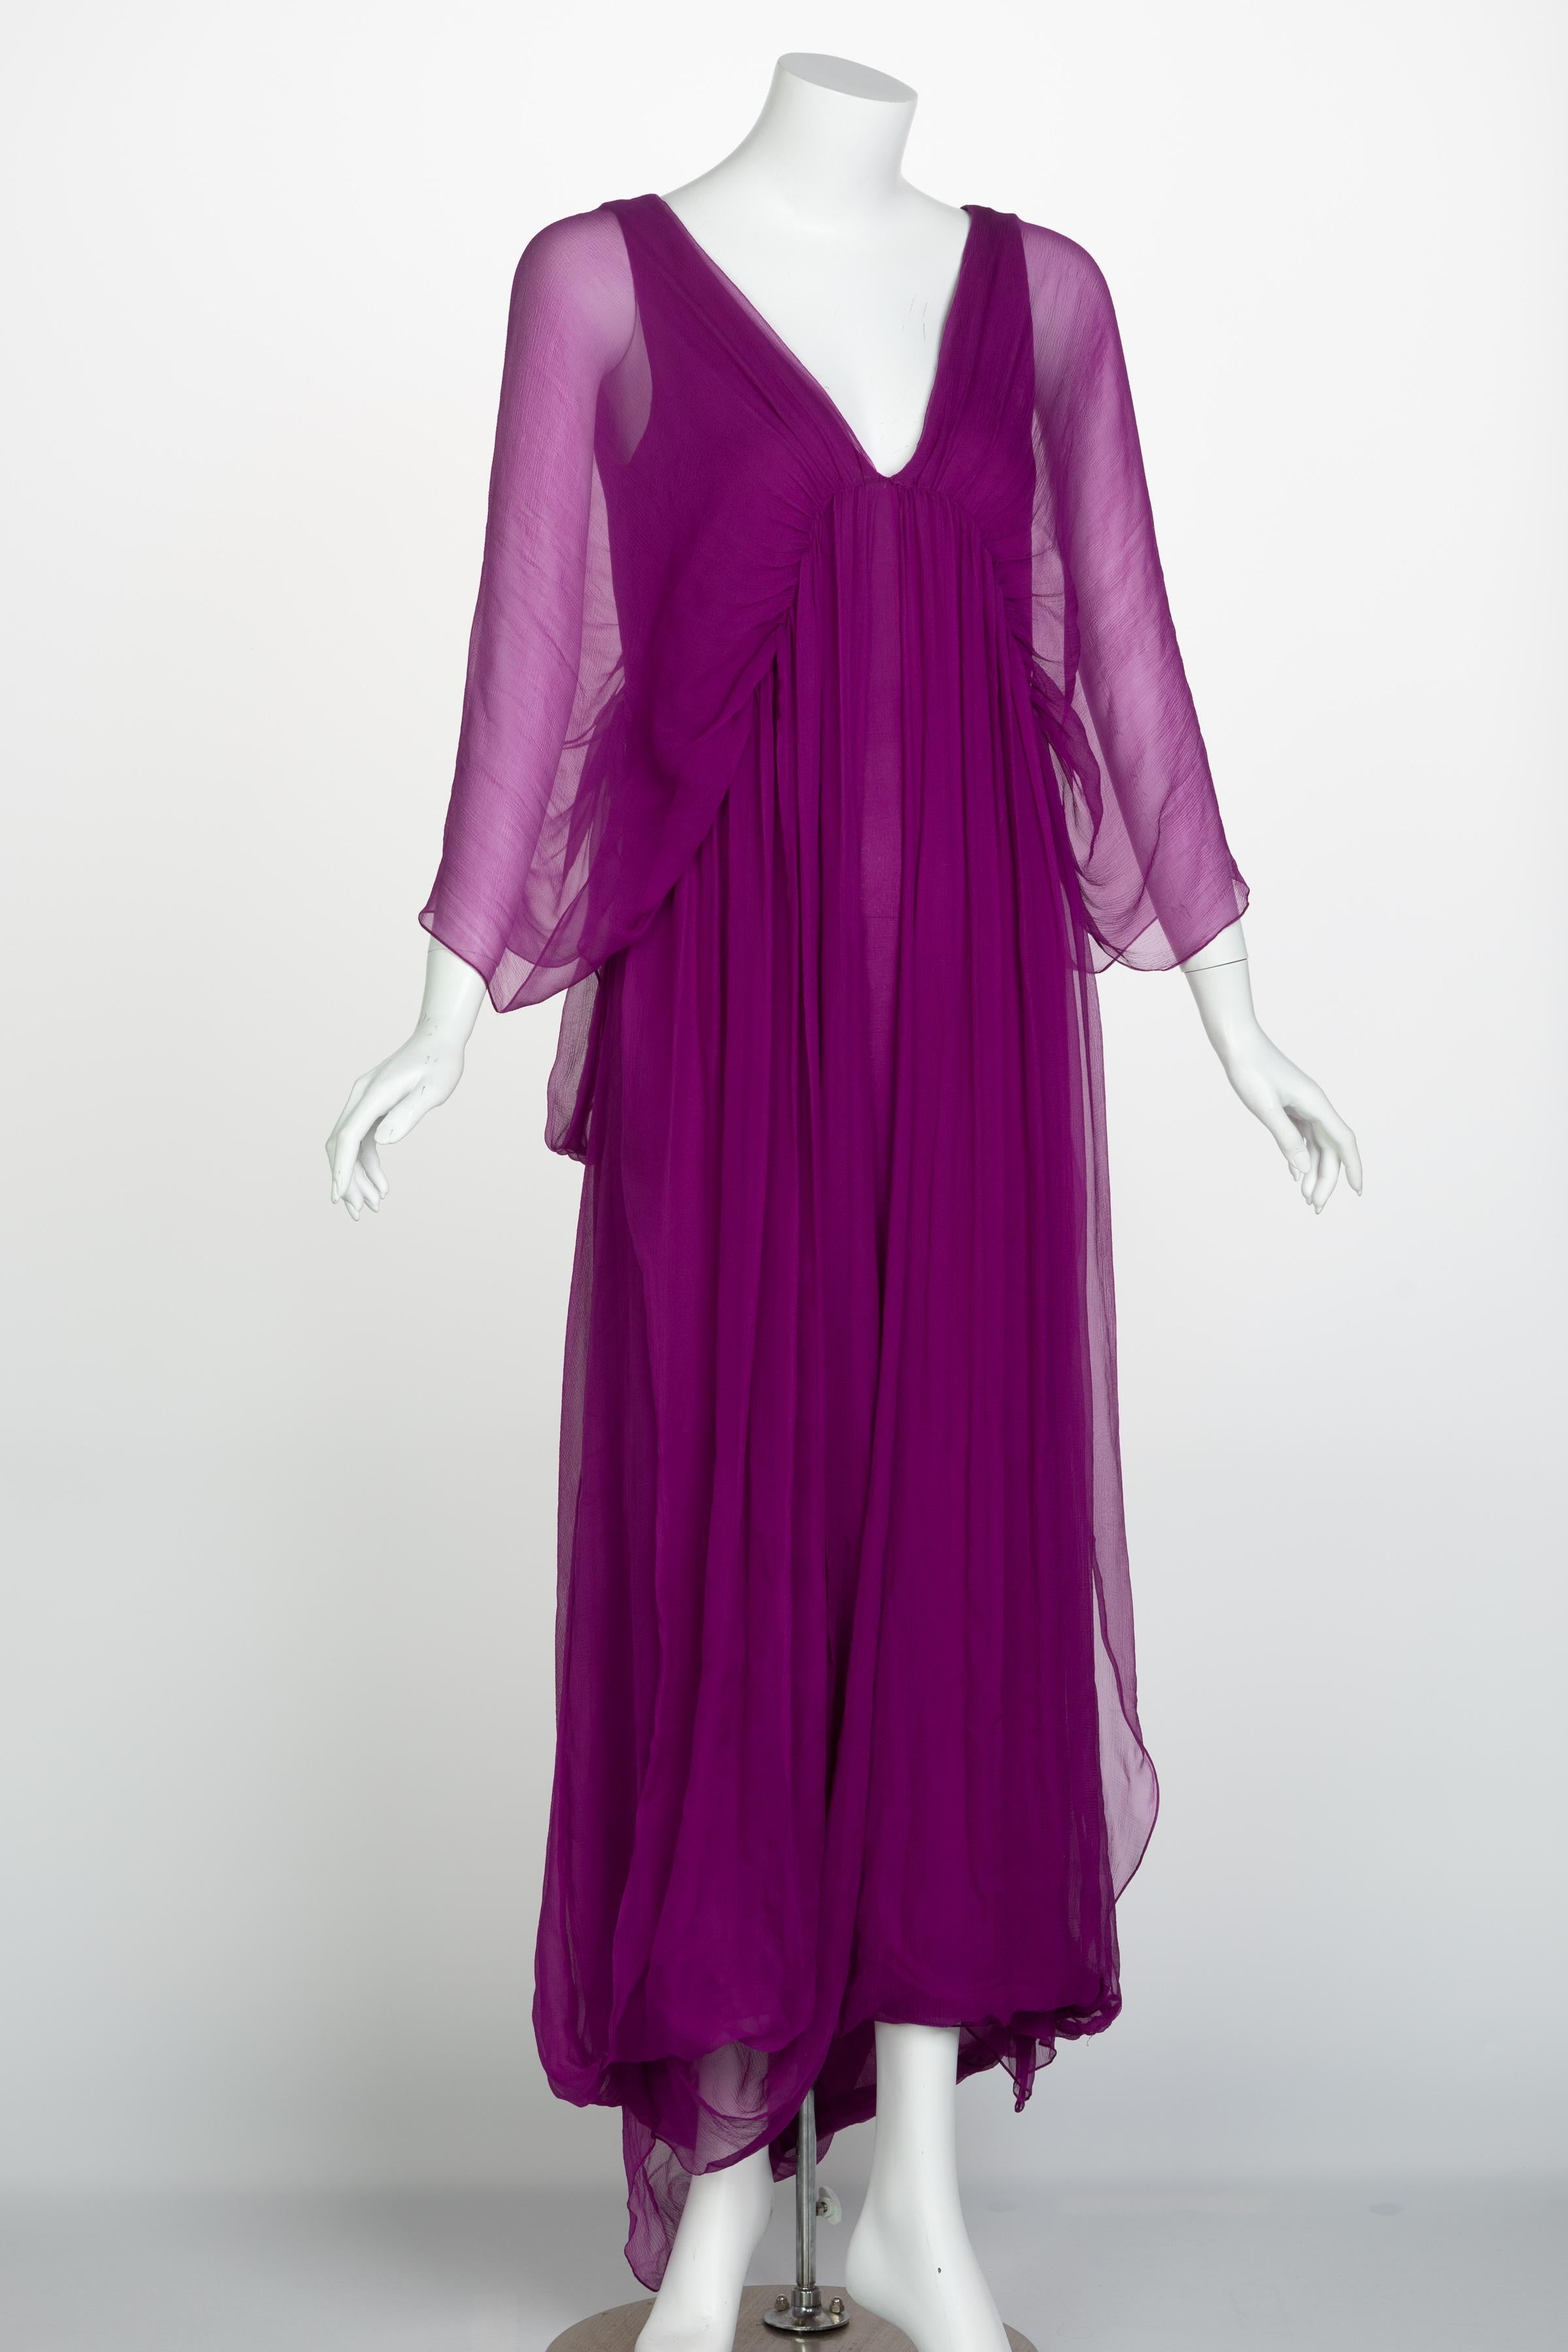  Yves Saint Laurent Edition Soir Chiffon Evening Dress circa 2009 In Excellent Condition For Sale In Boca Raton, FL